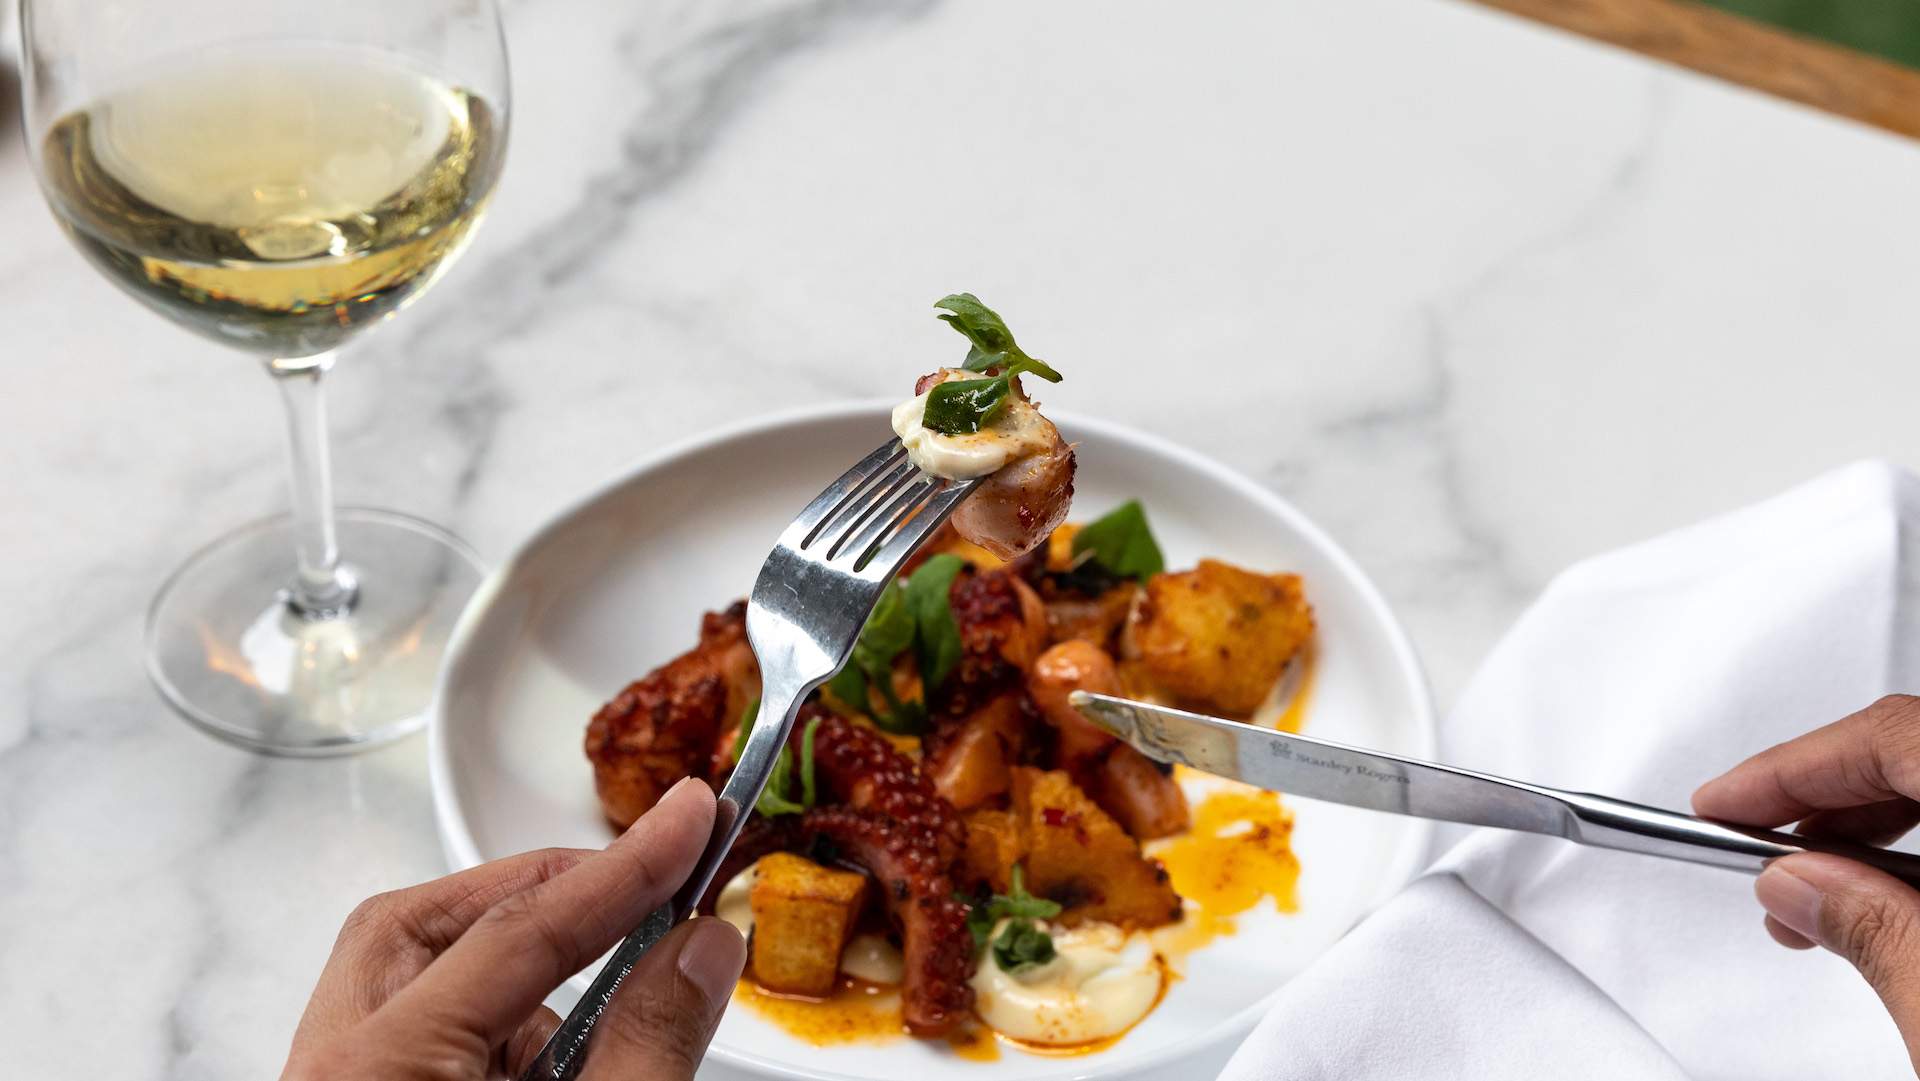 We're Giving Away Lunch for Four People at Ostro